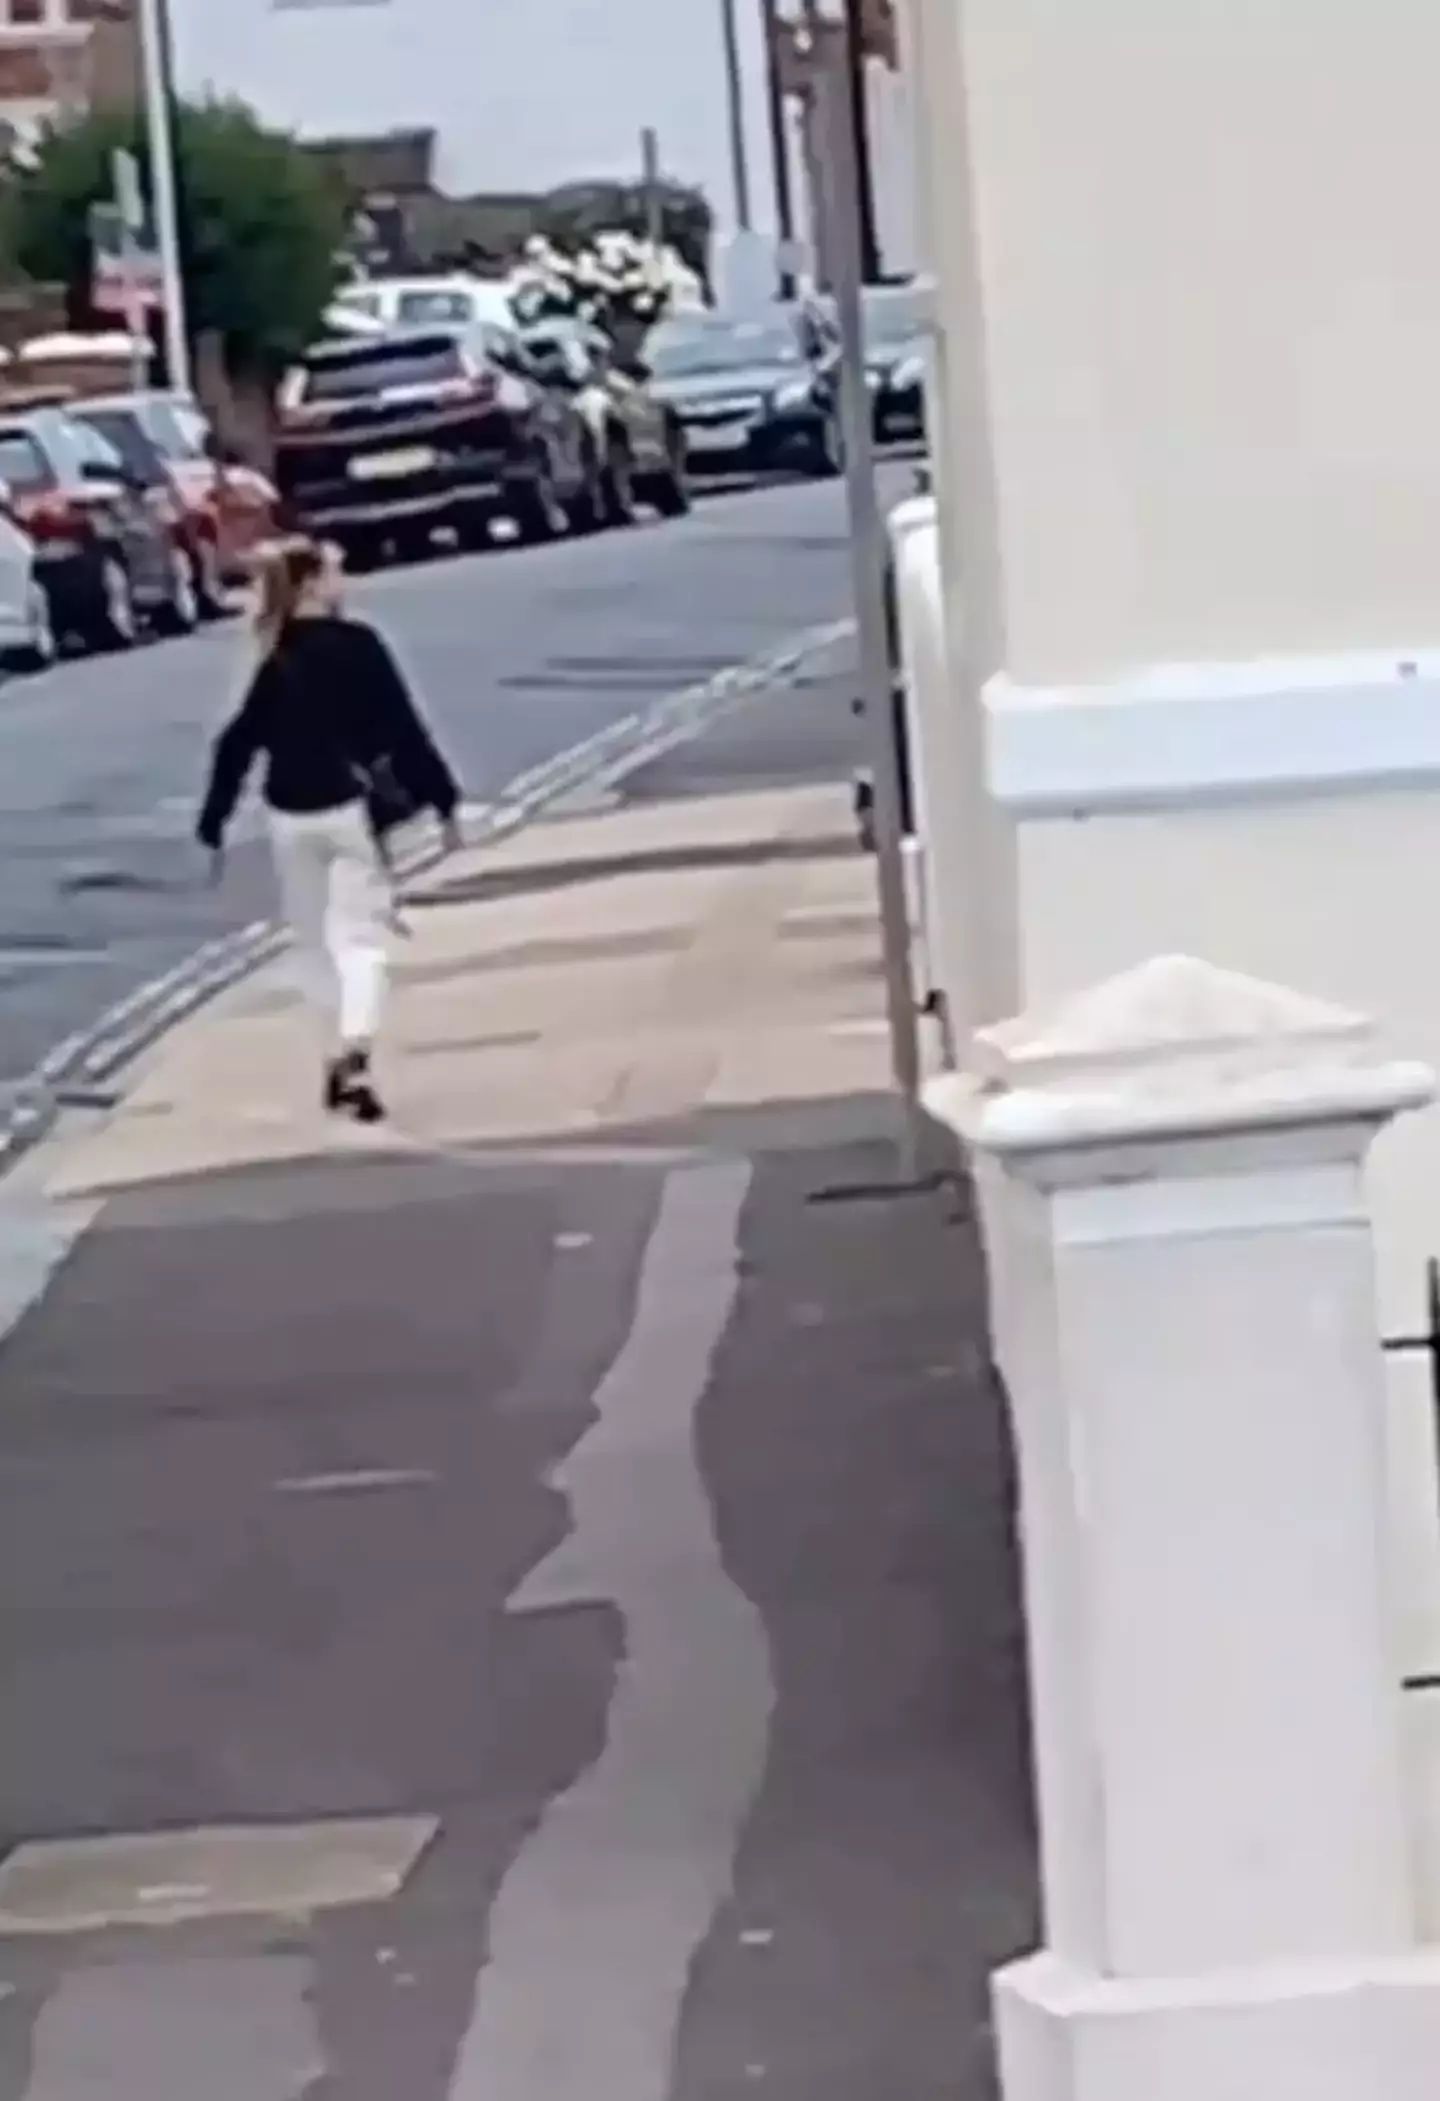 The viral TikTok shows a 'frozen' woman standing in the middle of the street.